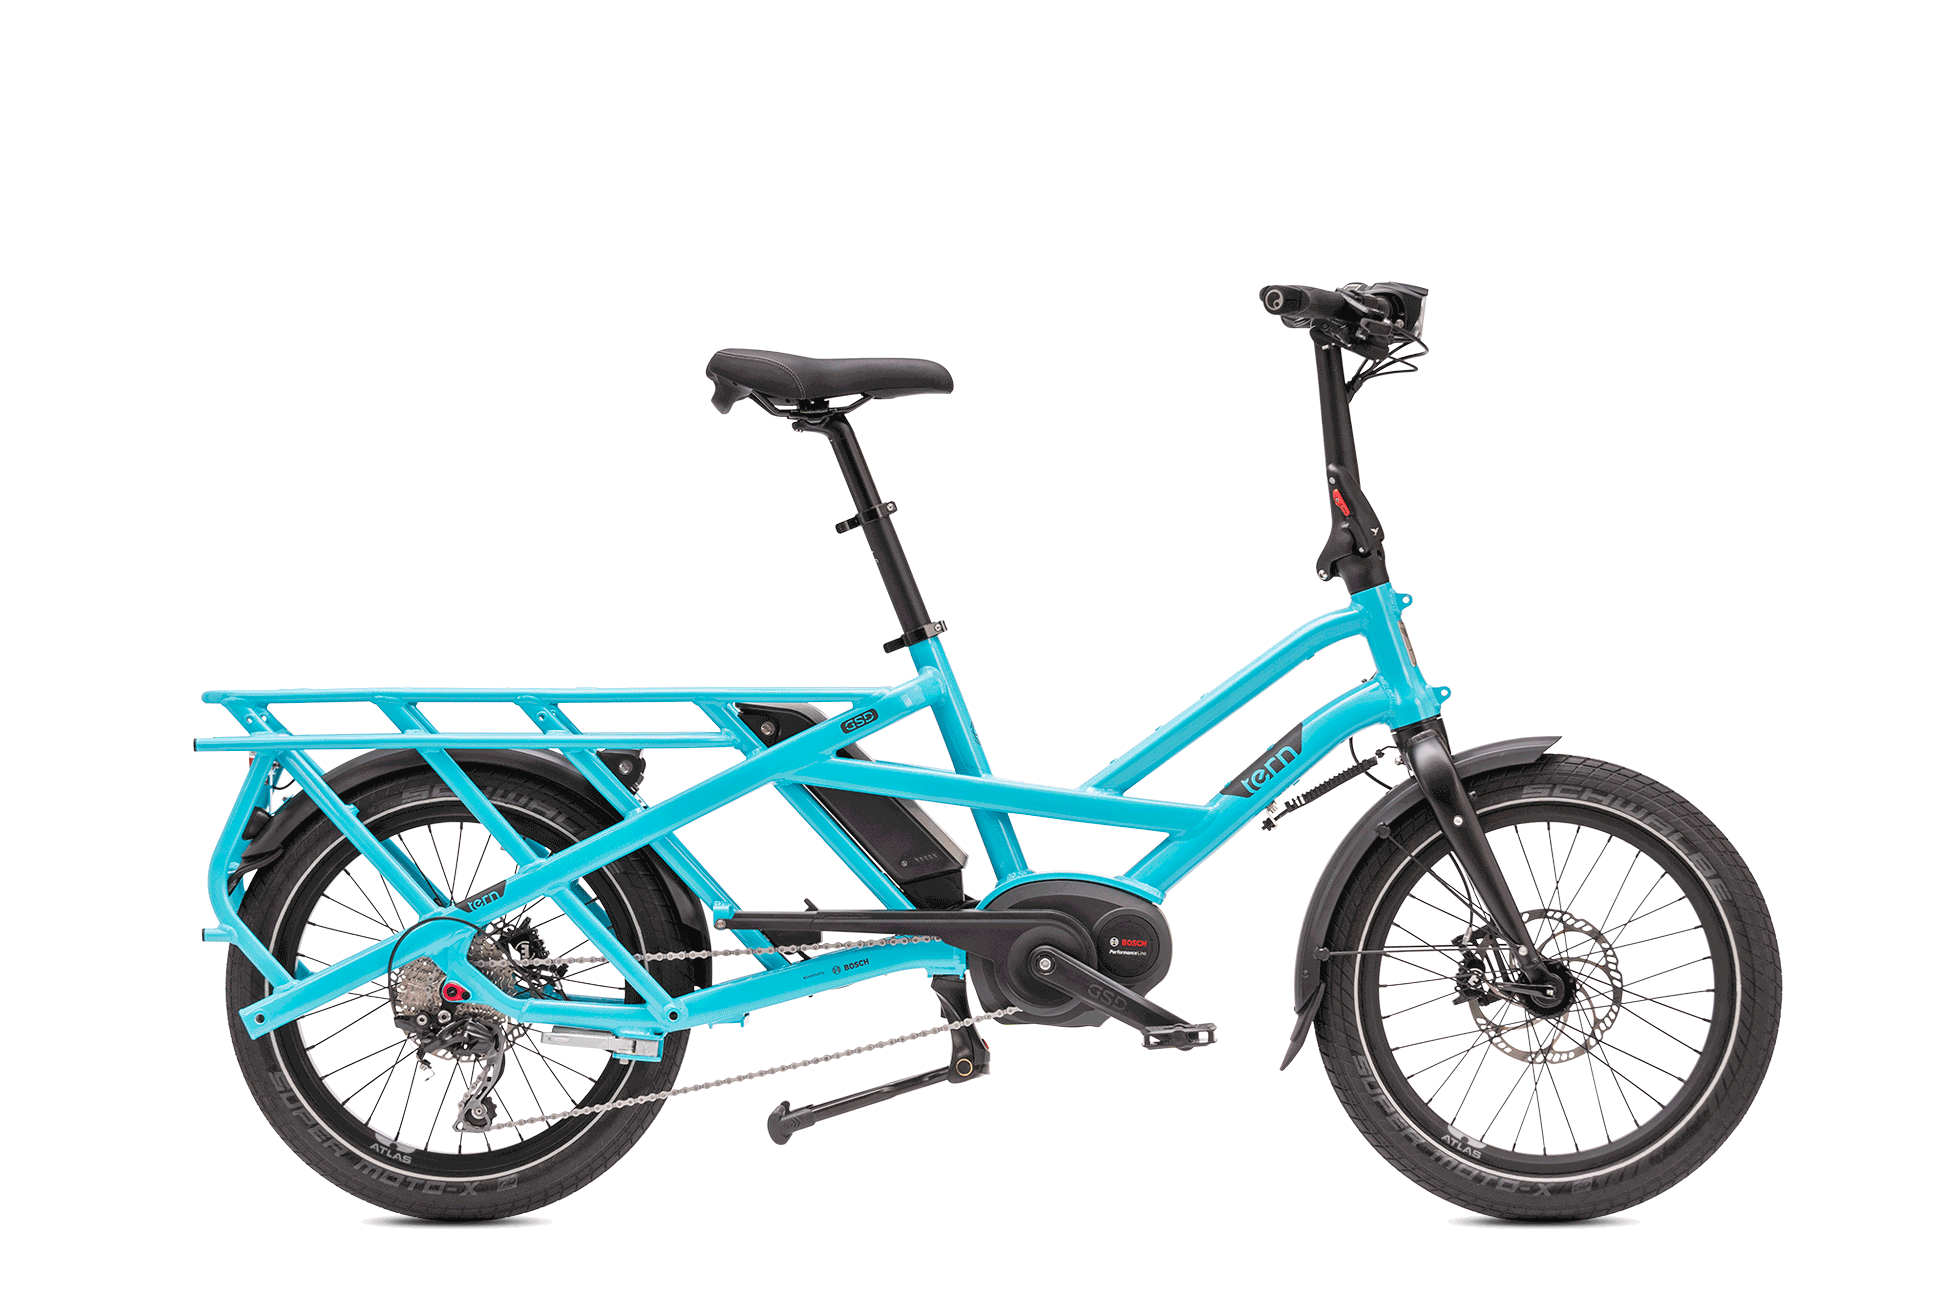 Bicycle Cargo Trailer Comparison Chart